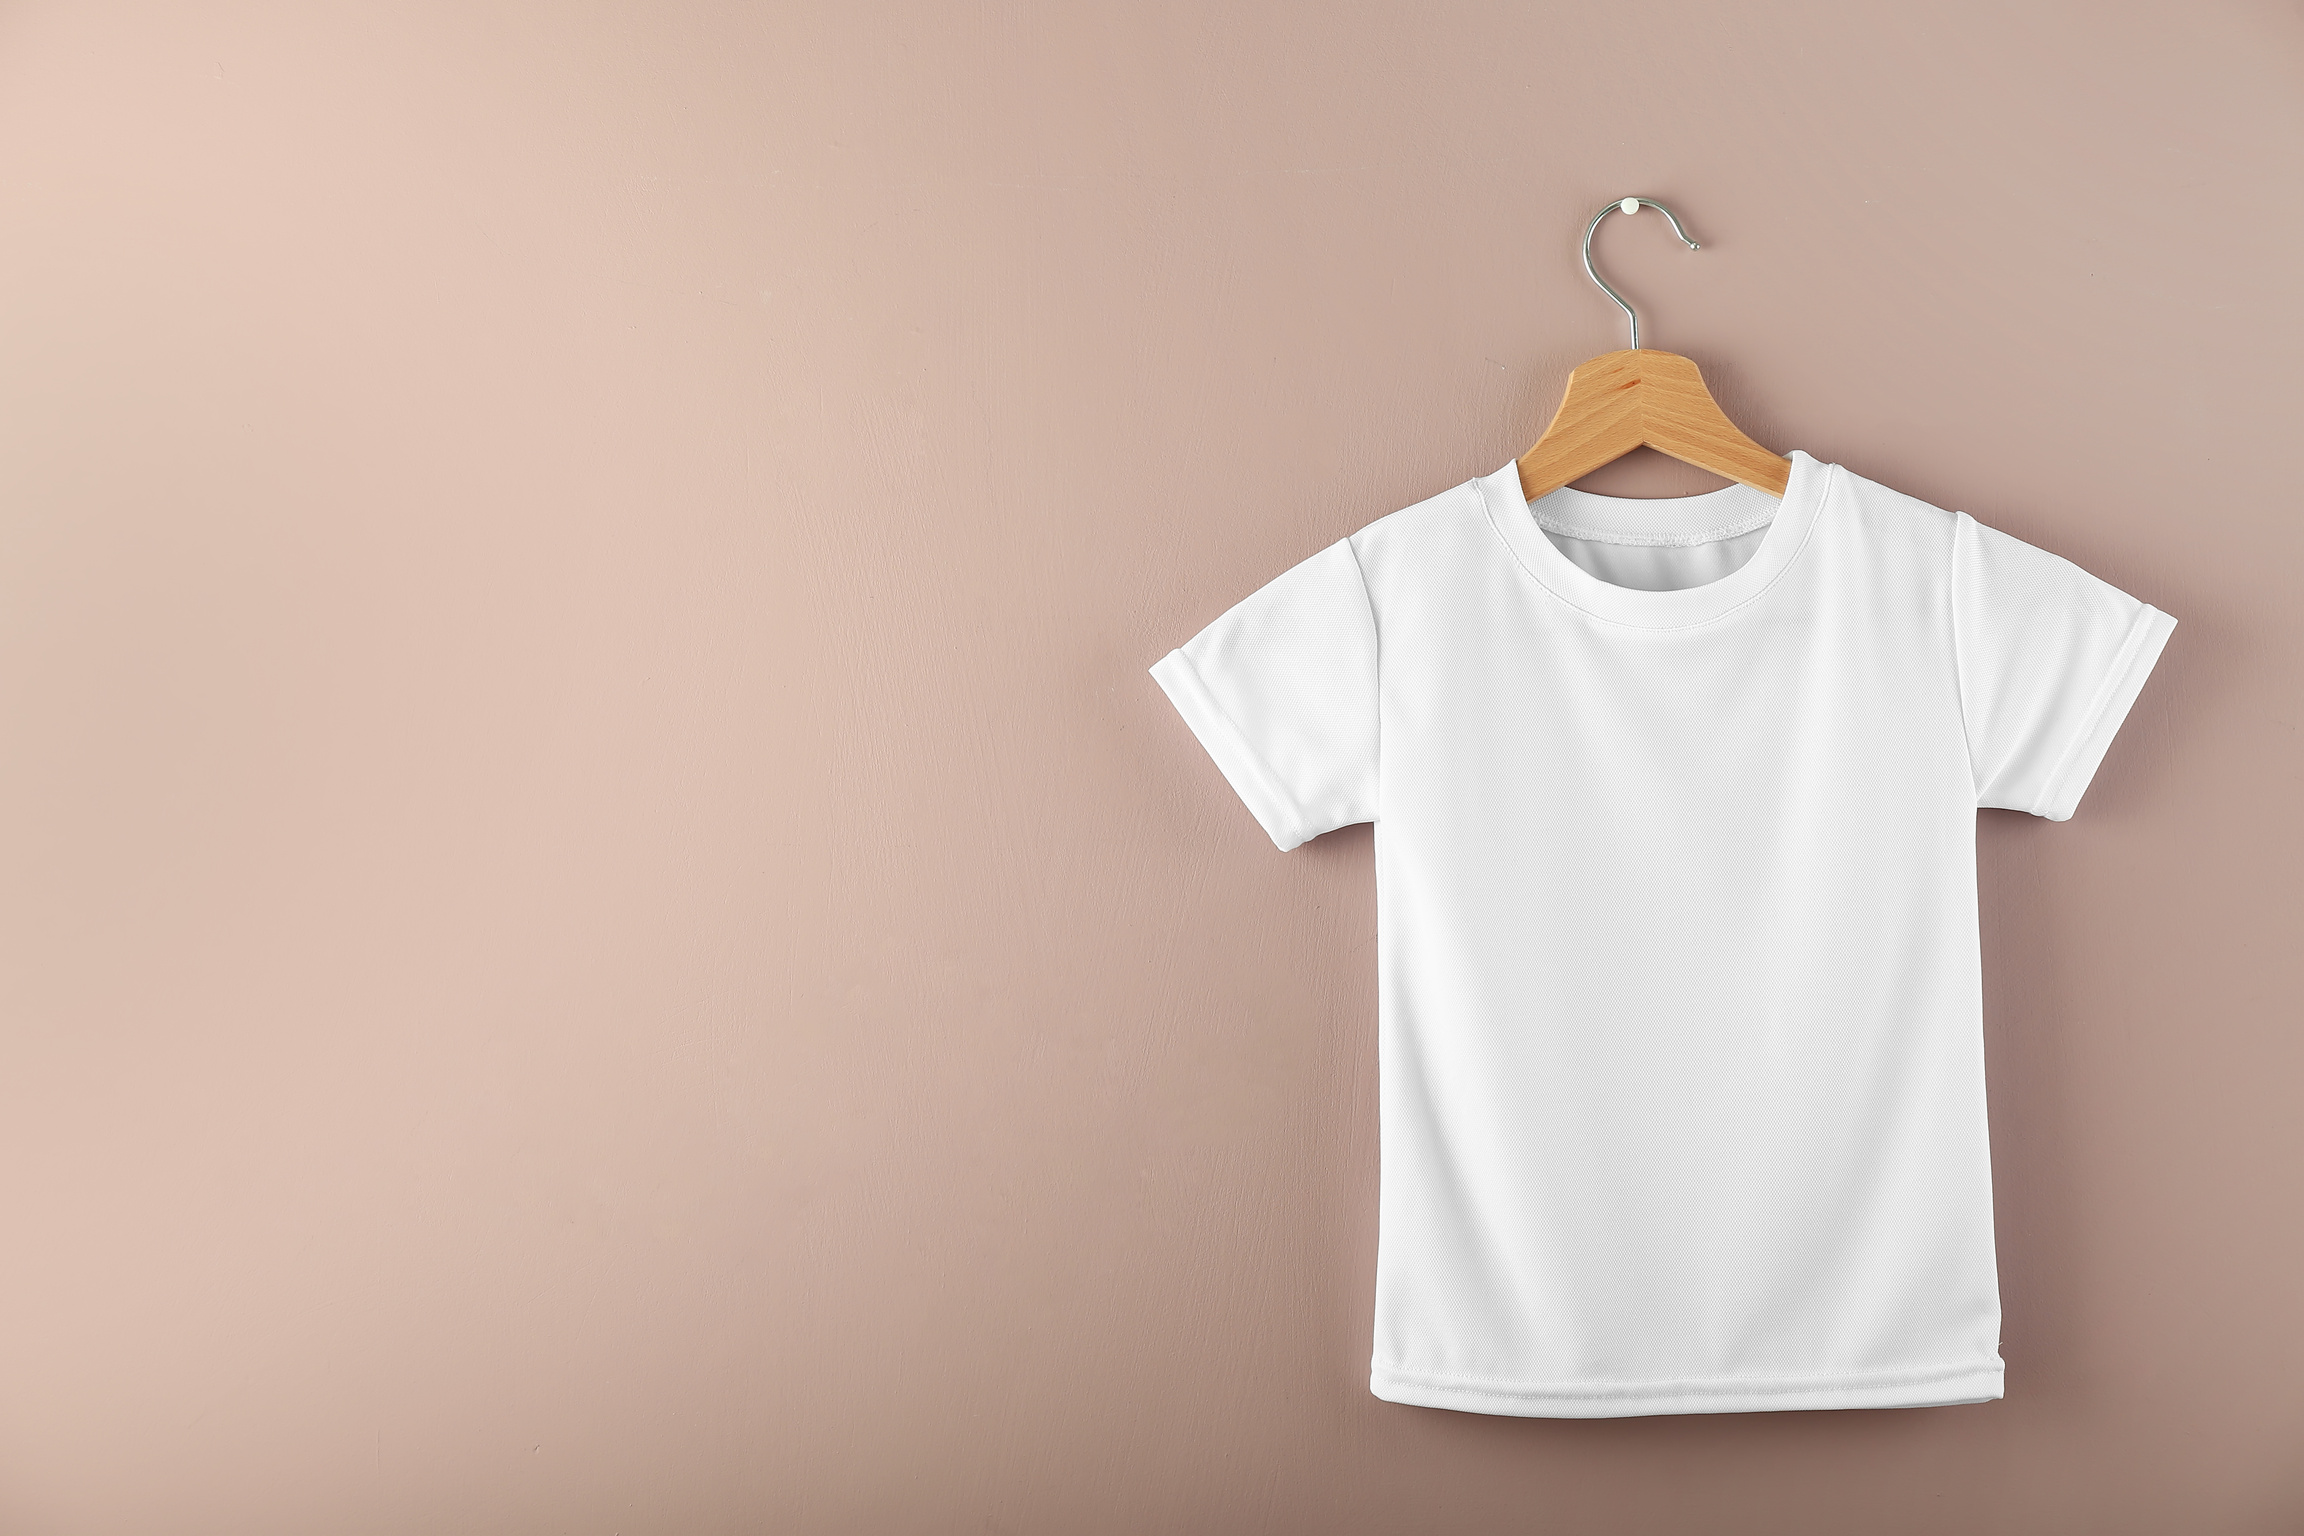 Hanger with Blank White T-Shirt on Color Background